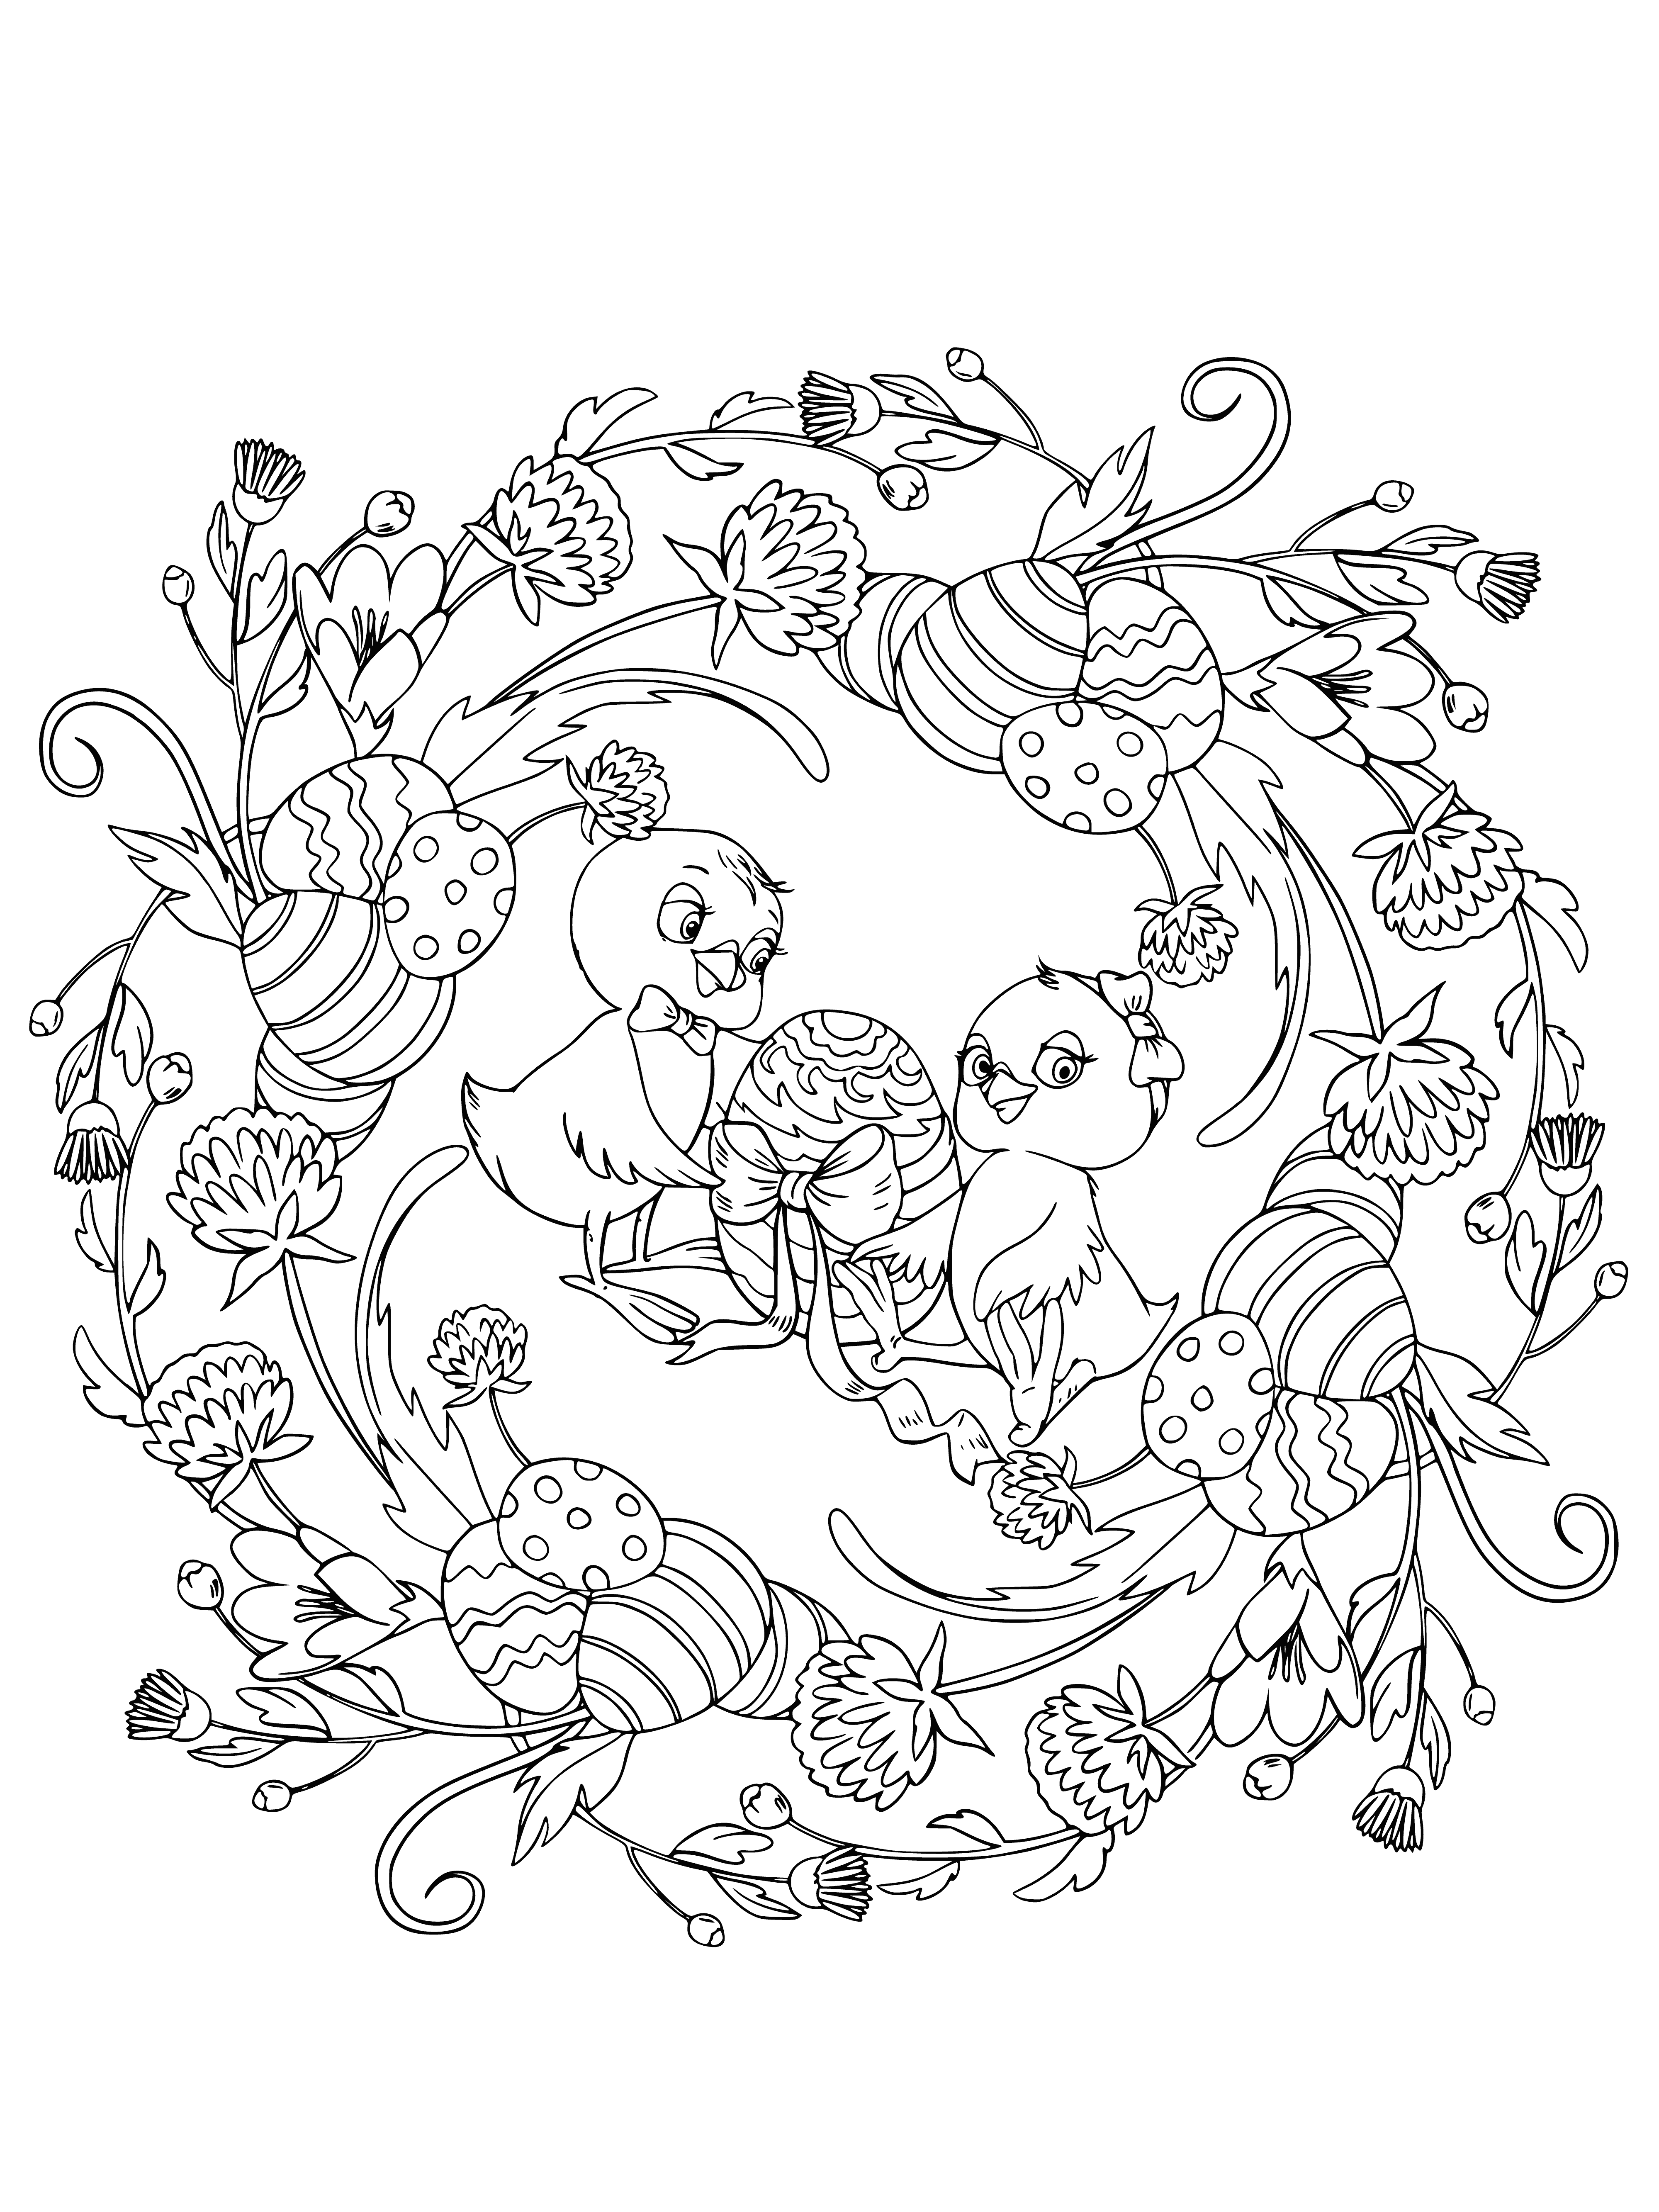 coloring page: #EasterColoring